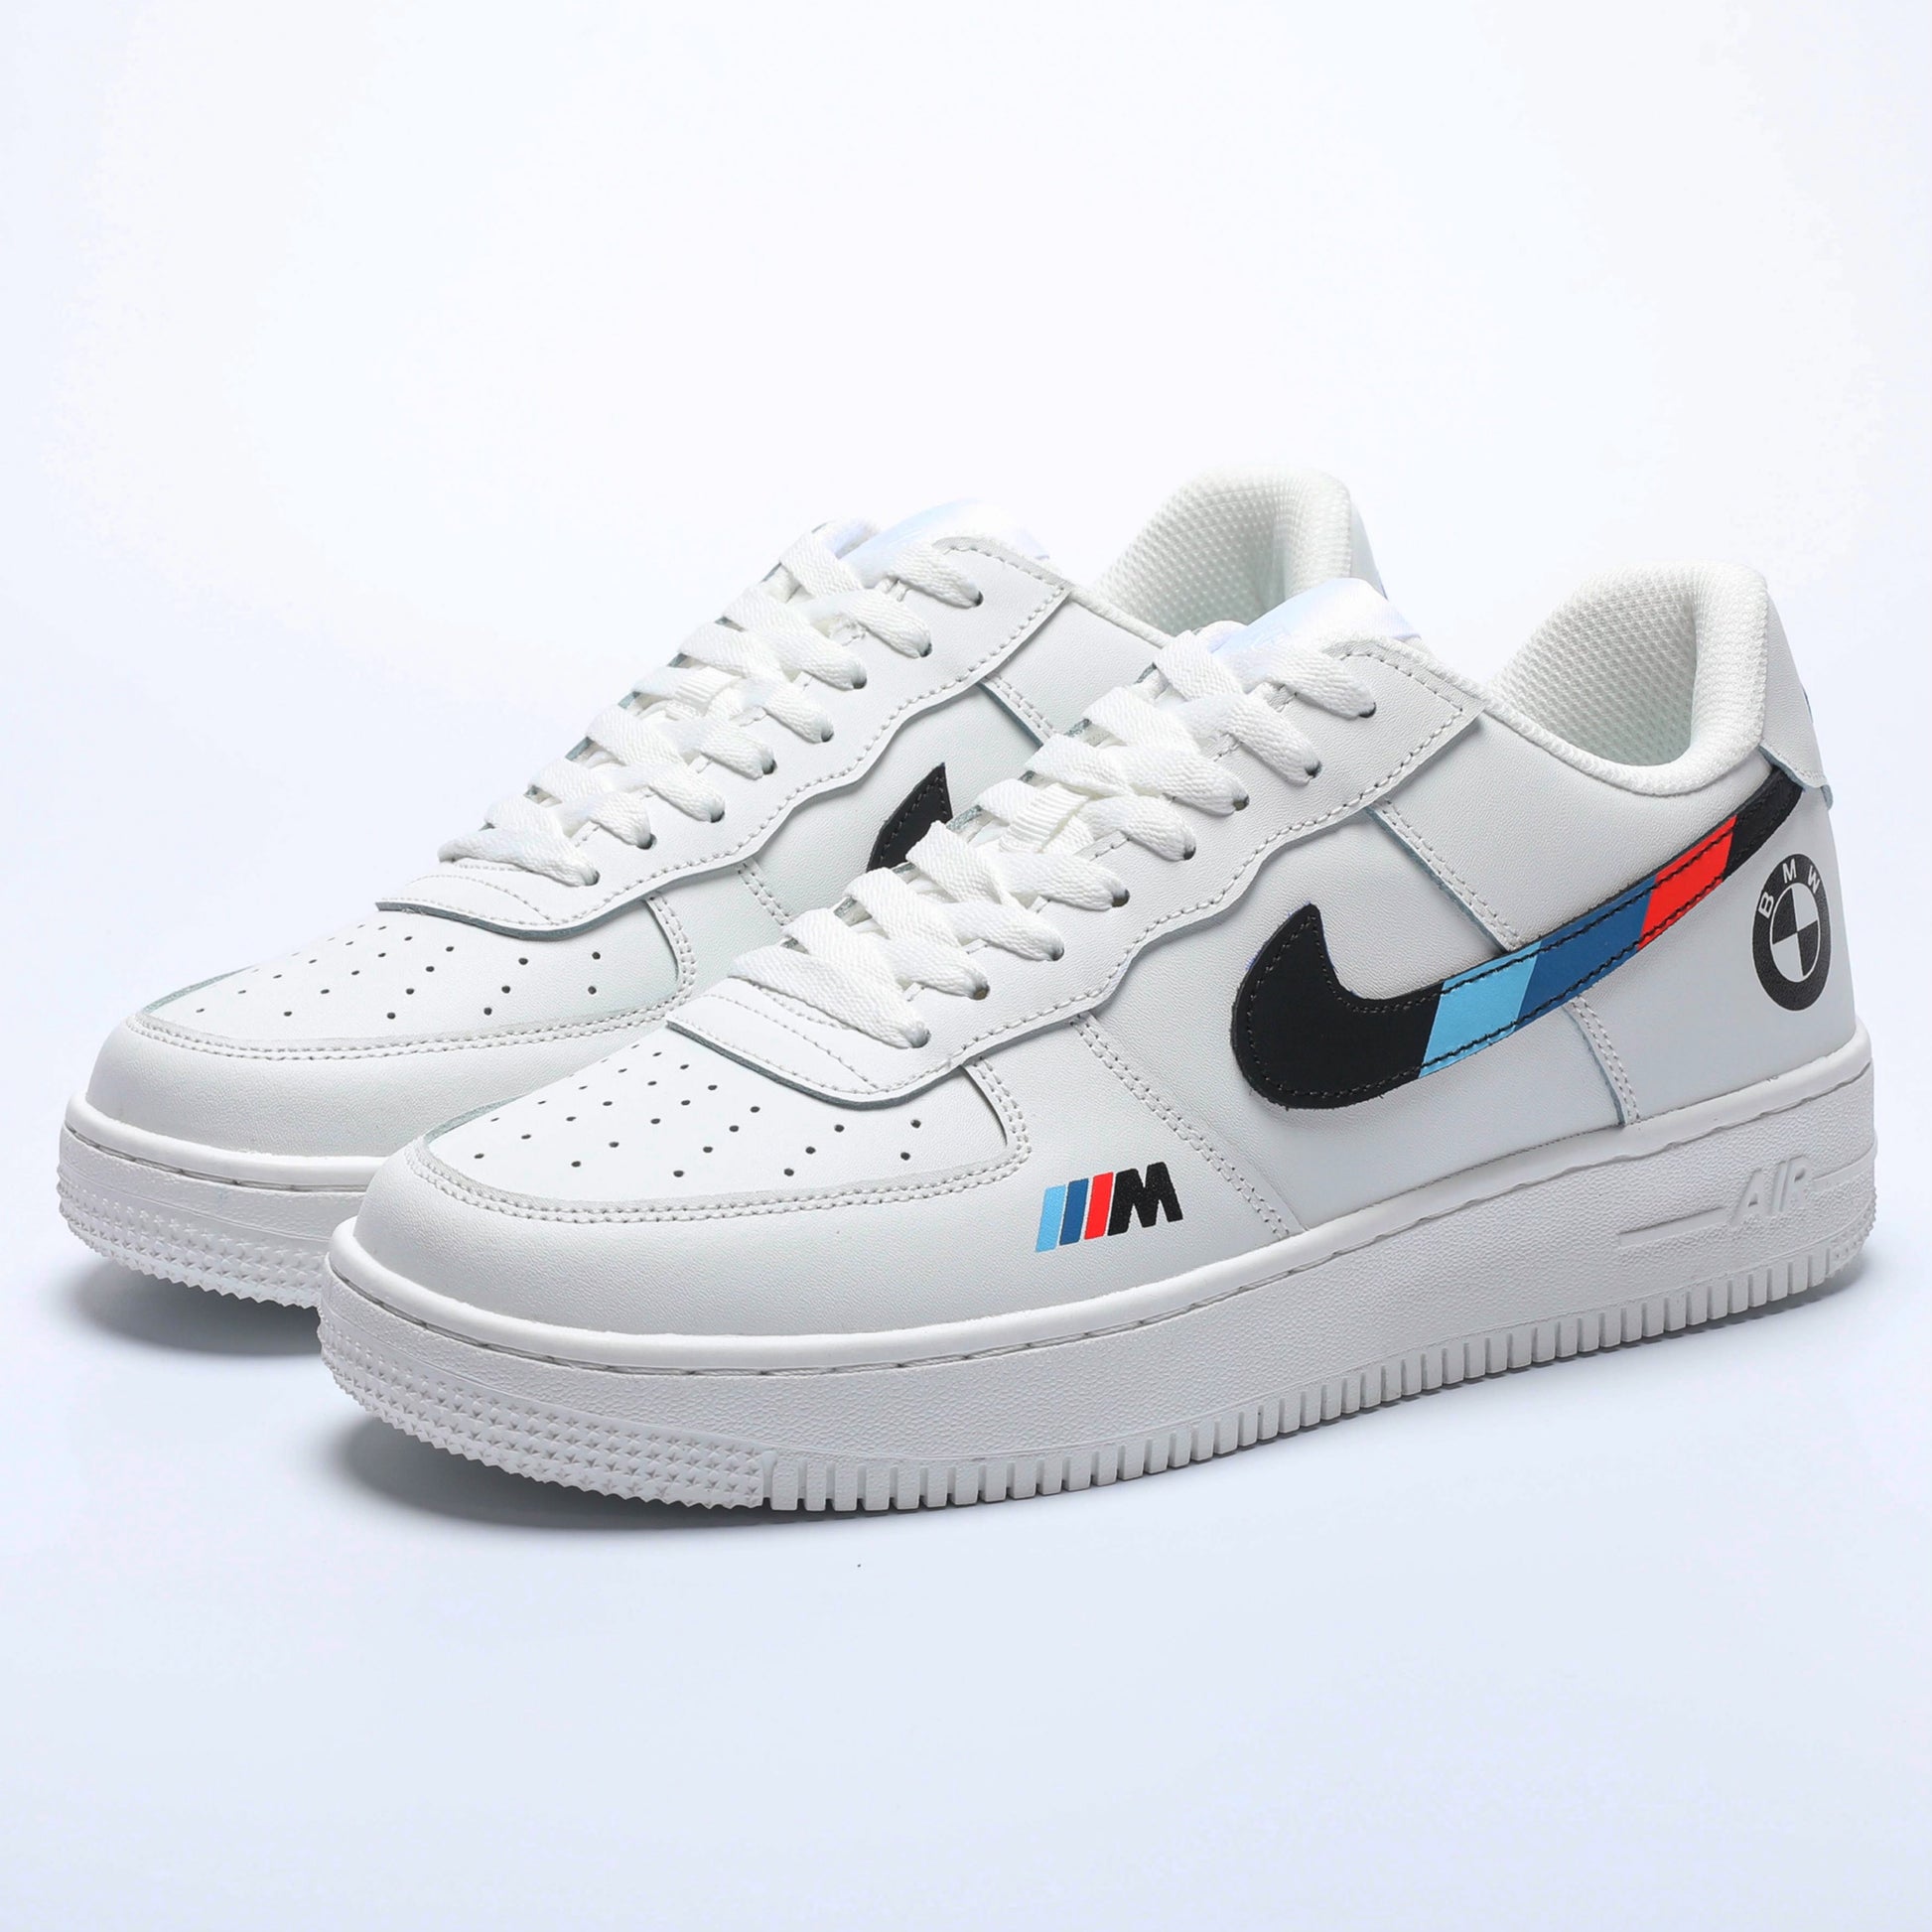 Limited BMW ///M Air Force 1s – BMW Trend Store